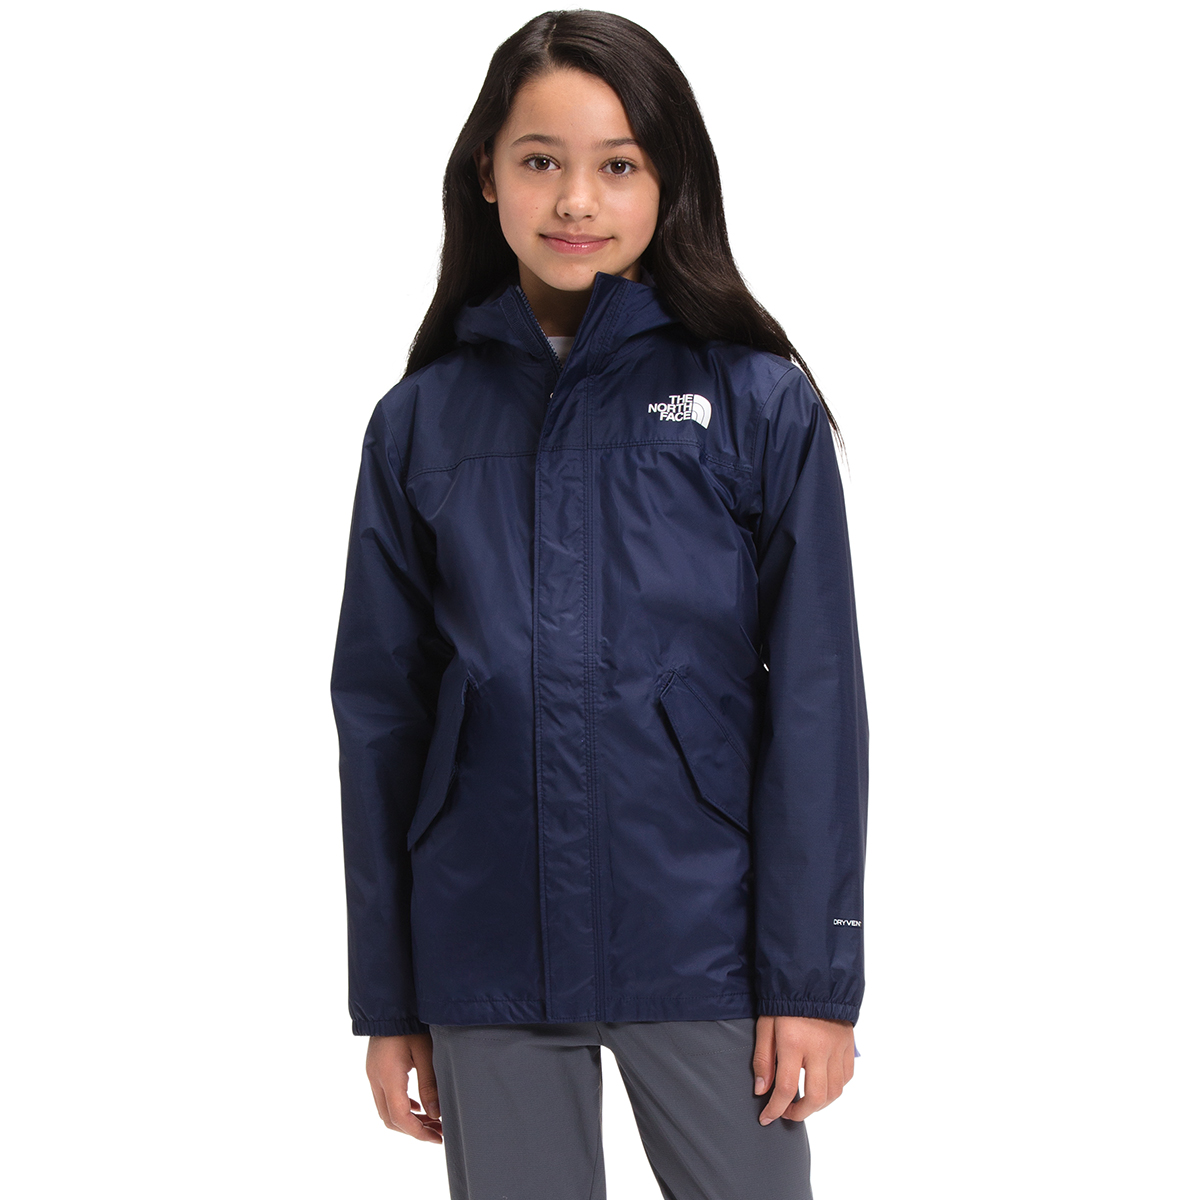 The North Face Kids' Stormy Rain Triclimate Jacket